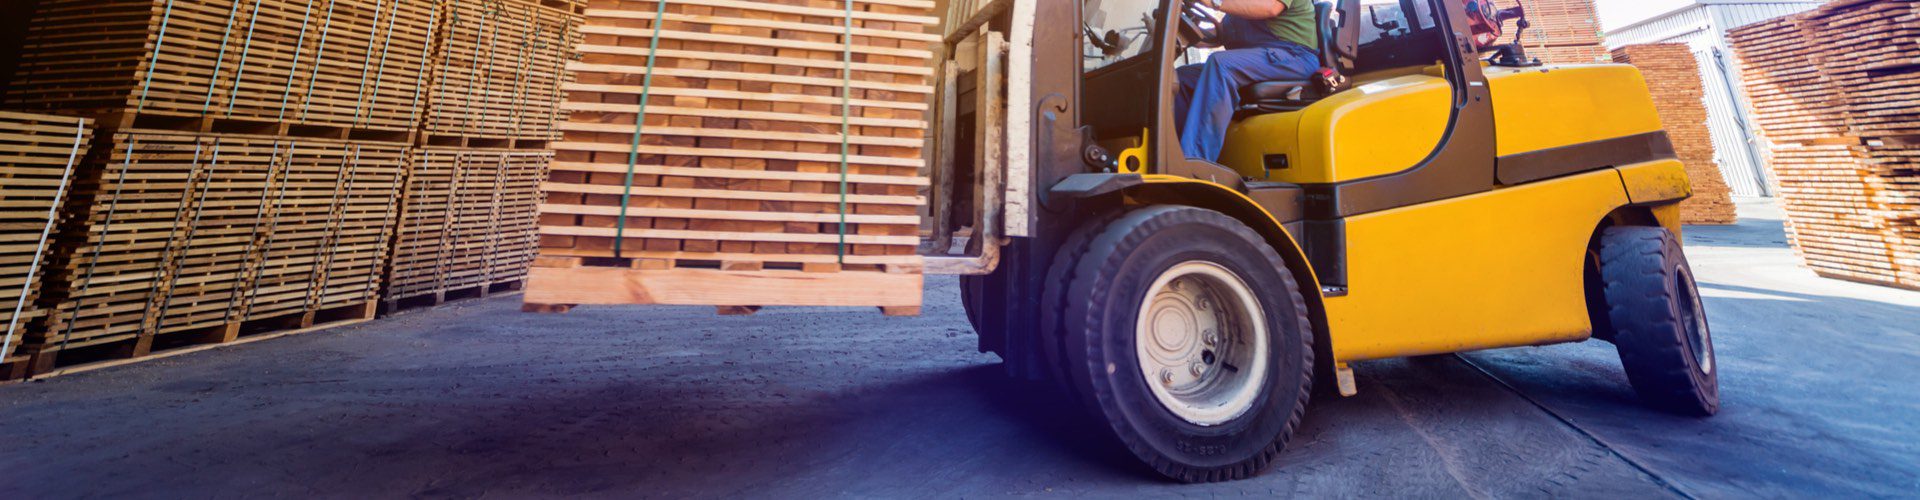 OSHA Powered Industrial Truck Inspections